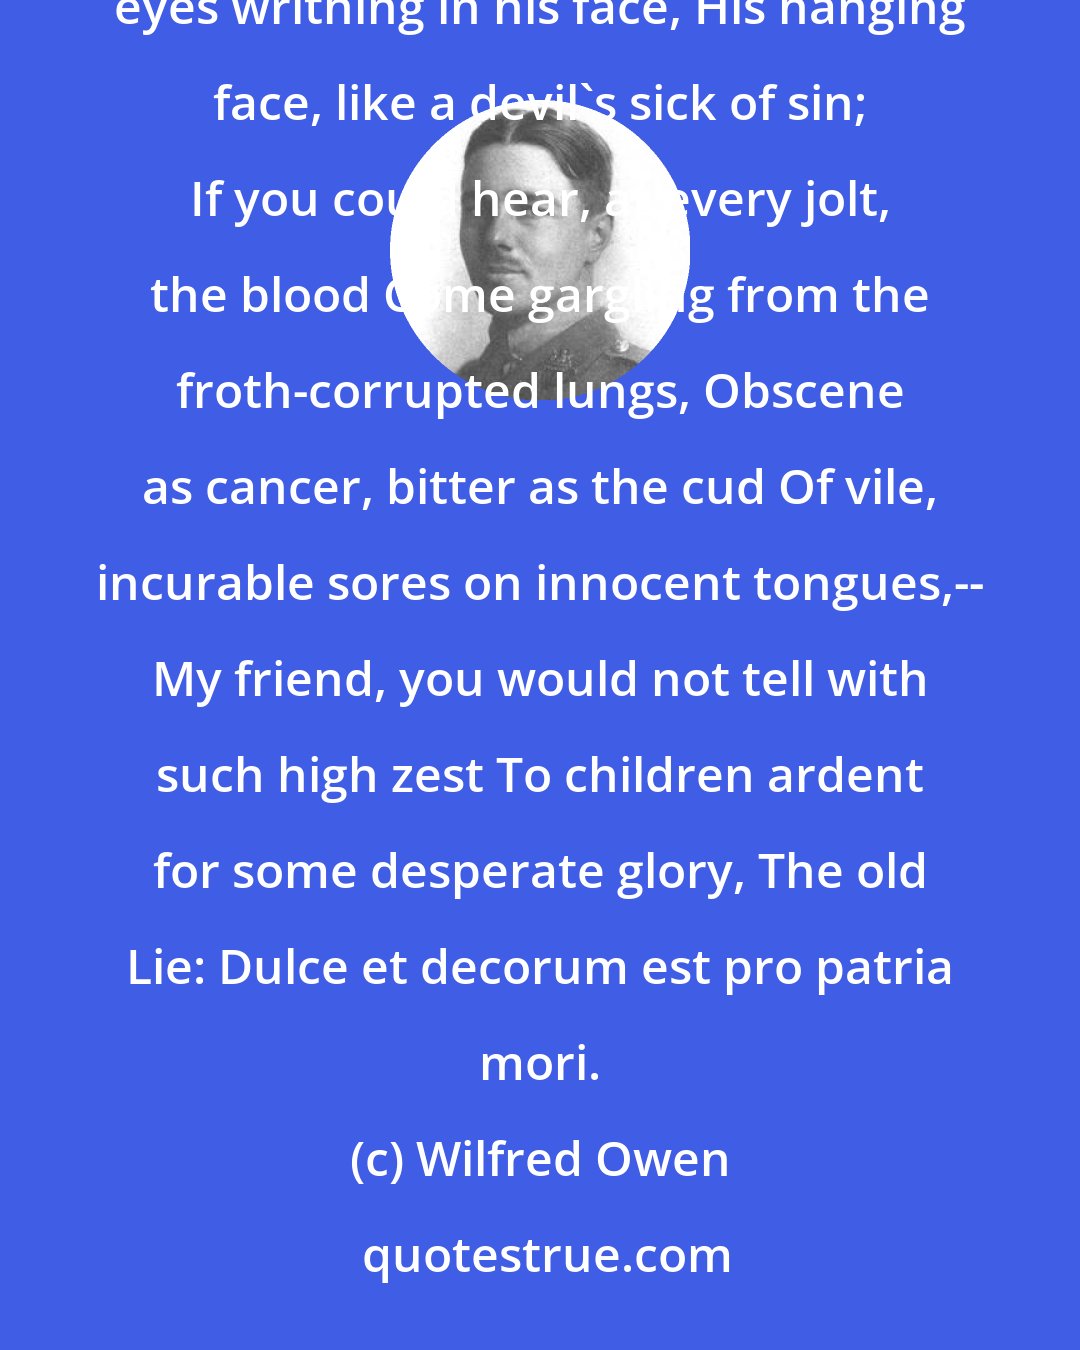 Wilfred Owen: If in some smothering dreams you too could pace Behind the wagon that we flung him in, And watch the white eyes writhing in his face, His hanging face, like a devil's sick of sin; If you could hear, at every jolt, the blood Come gargling from the froth-corrupted lungs, Obscene as cancer, bitter as the cud Of vile, incurable sores on innocent tongues,-- My friend, you would not tell with such high zest To children ardent for some desperate glory, The old Lie: Dulce et decorum est pro patria mori.